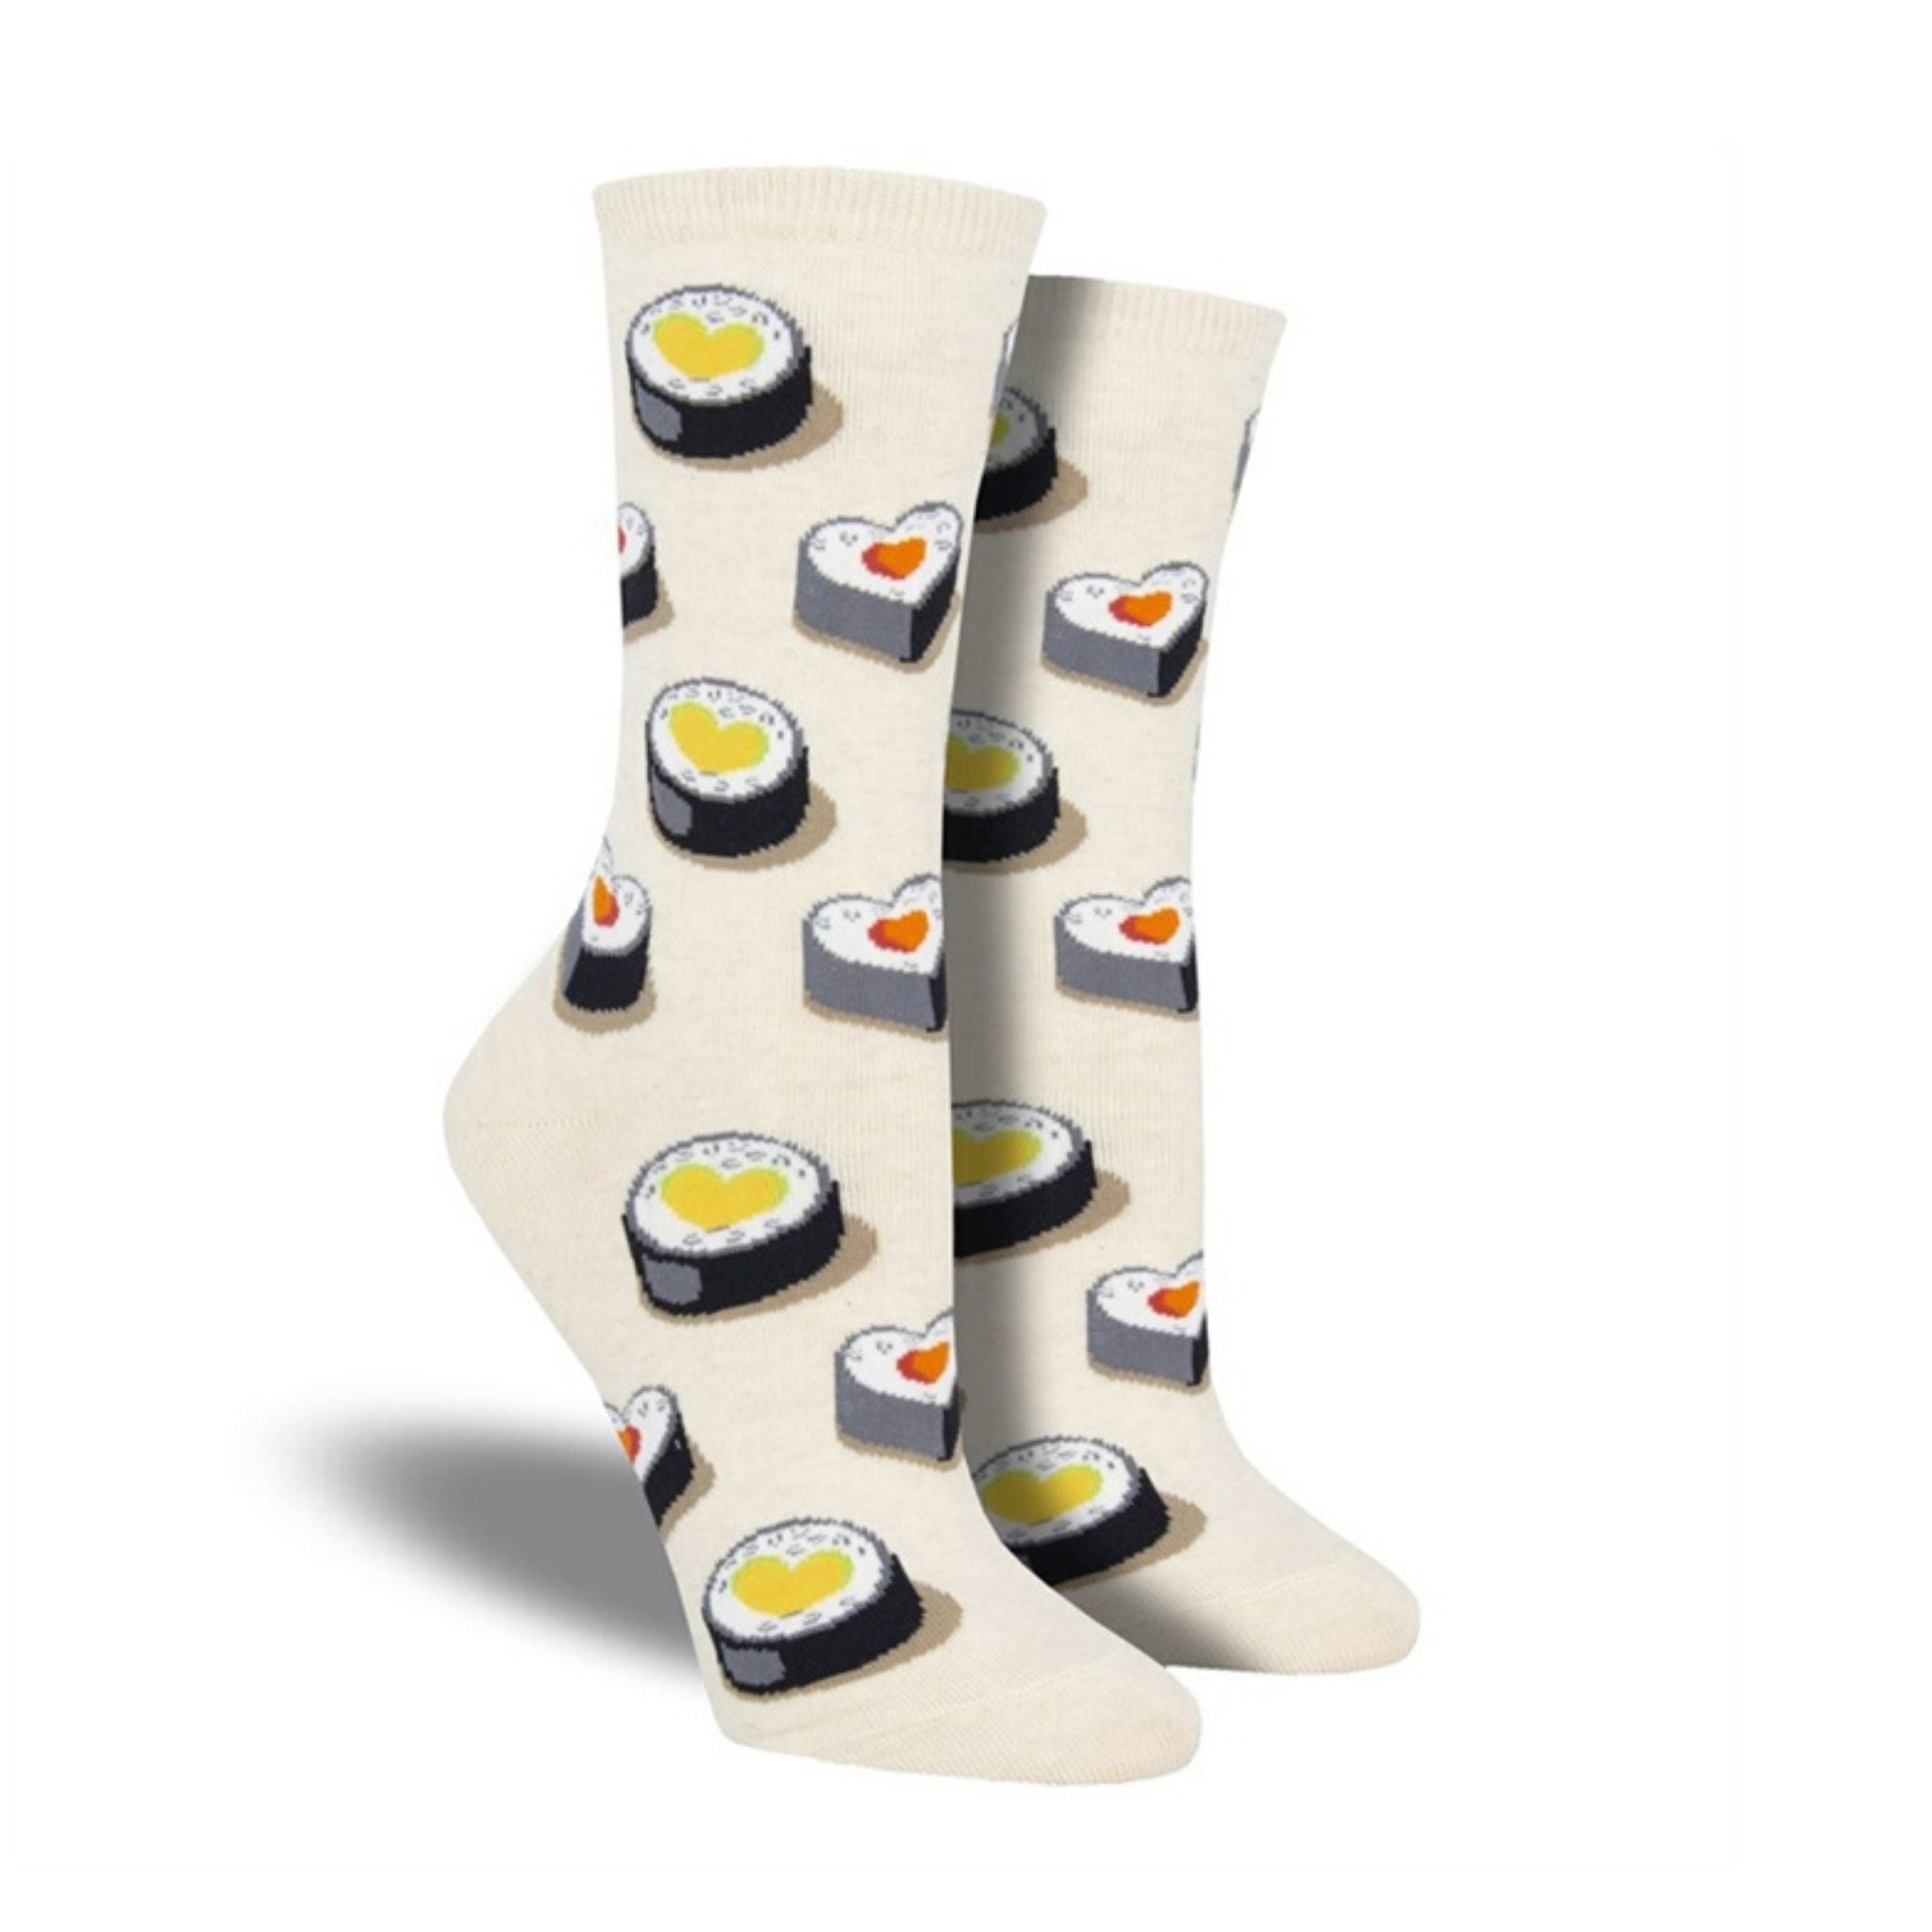 White socks with cute heart shaped sushi rolls on them